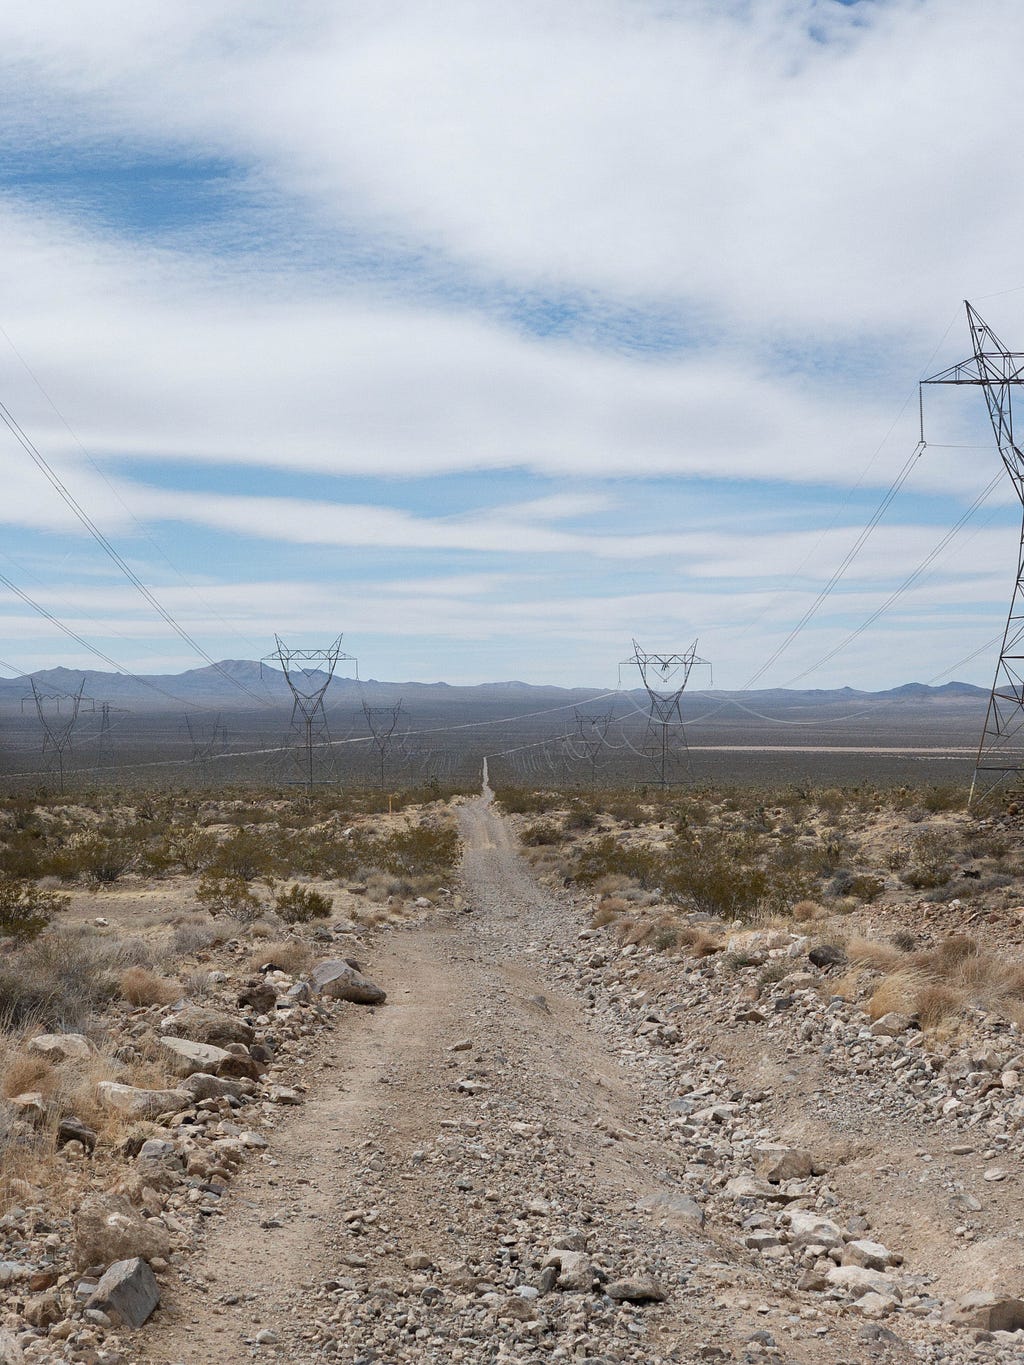 Looking backwards at a rocky and uneven dirt road going up a mountain. The road stretches into the desert. Road has long distance transmission towers on either side